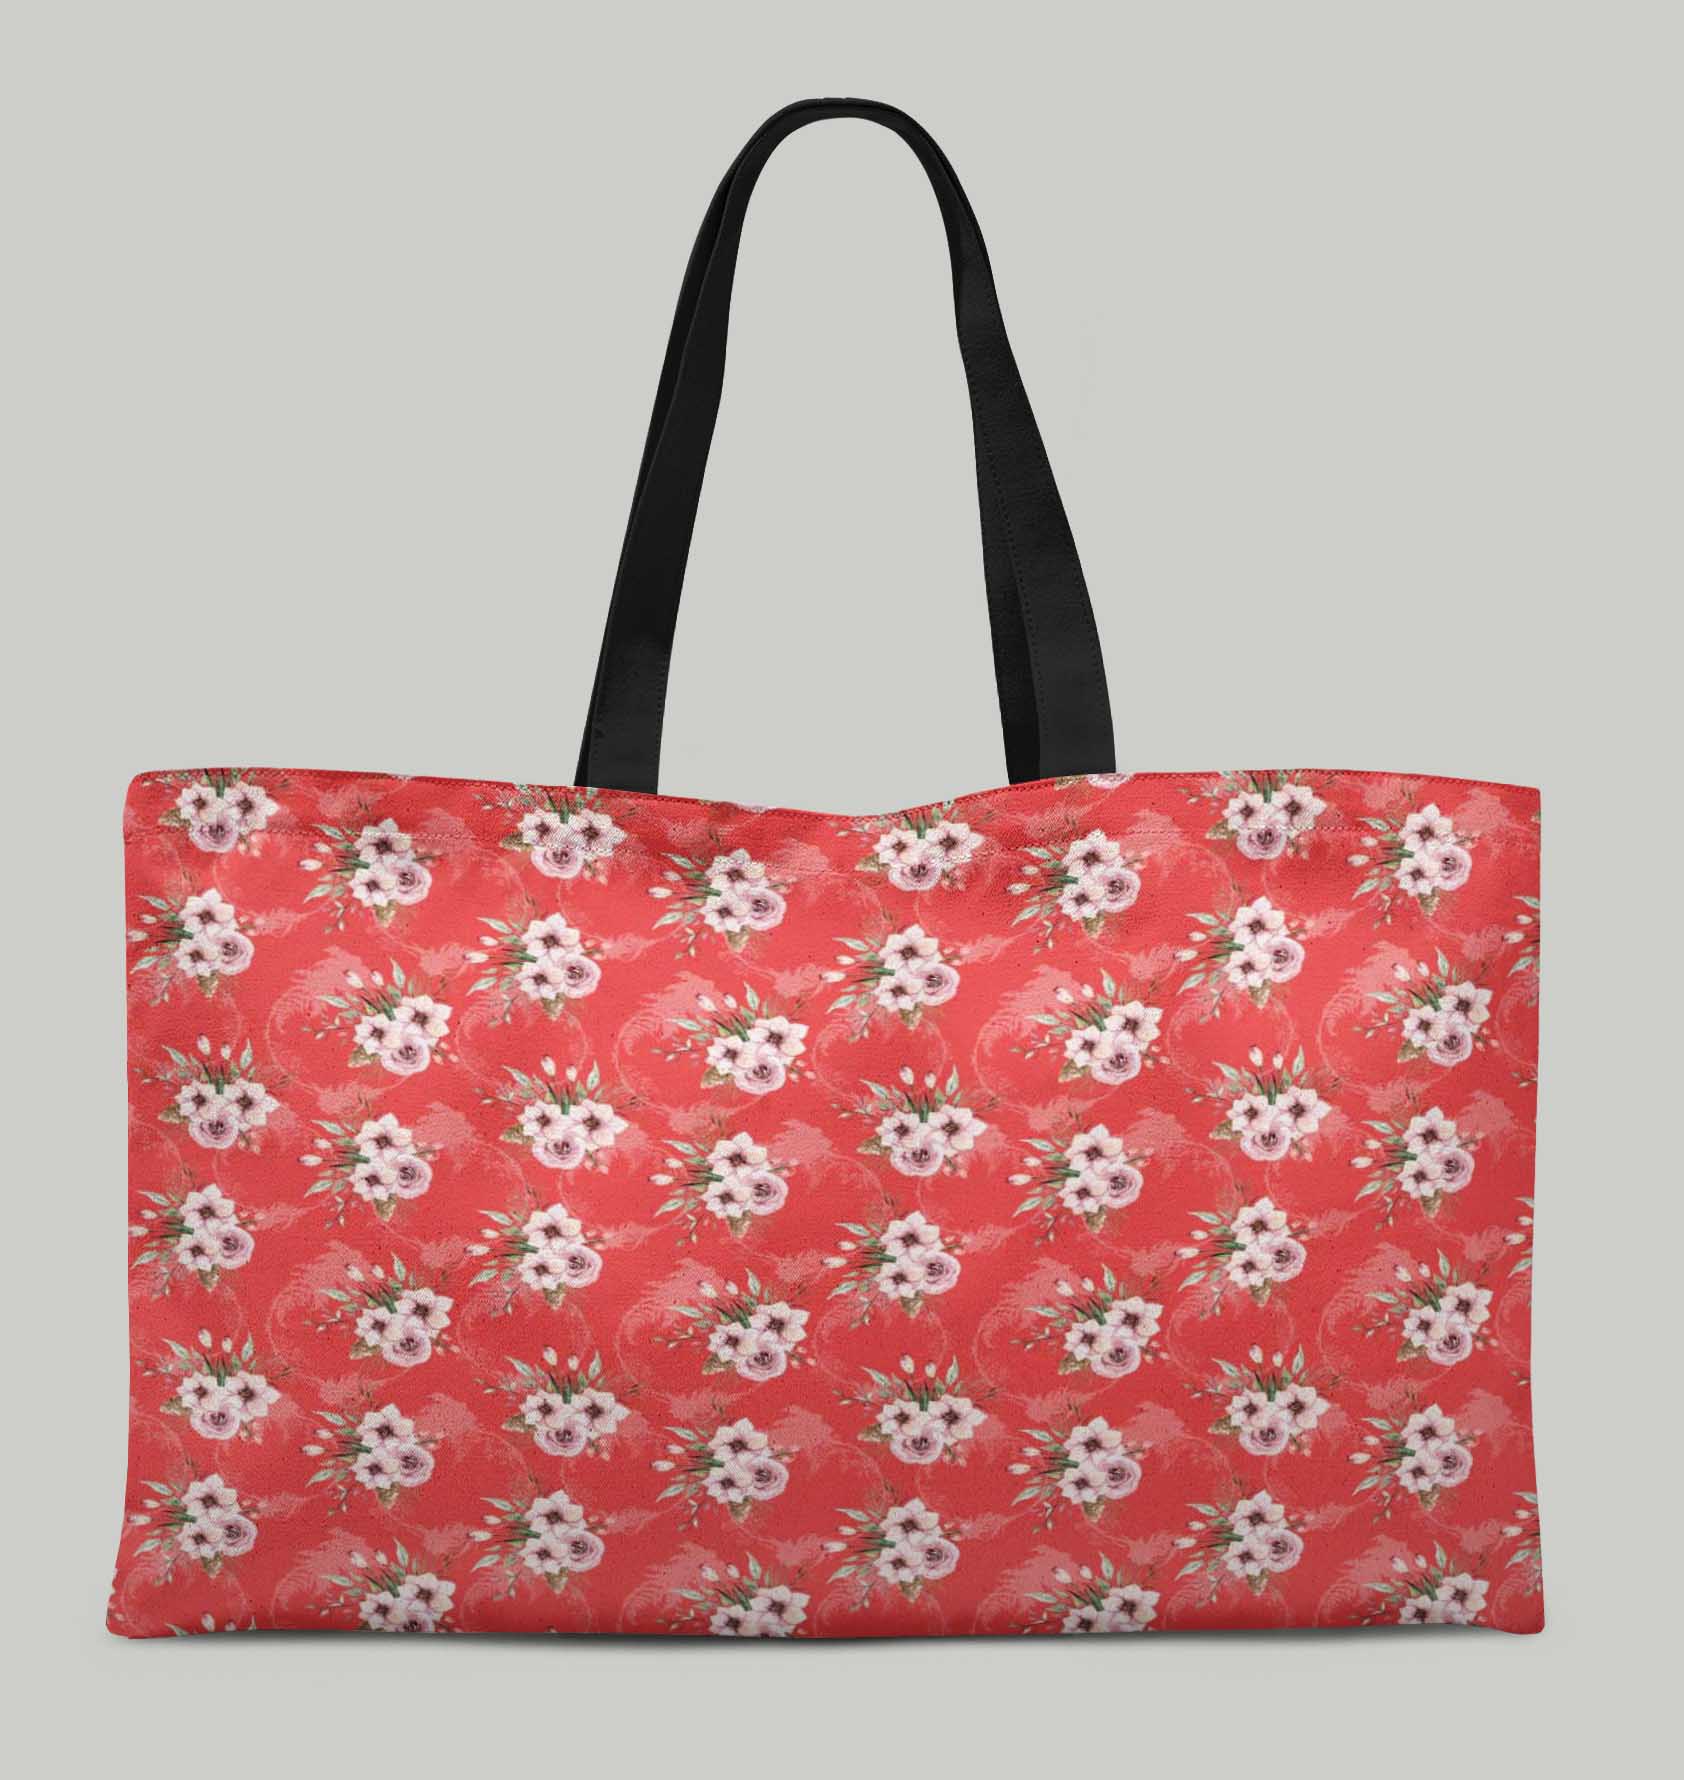 Details about  / S4Sassy Floral  Canvas Shopping Tote Bag Carrying Handbag Casual  Bag-FL-589G